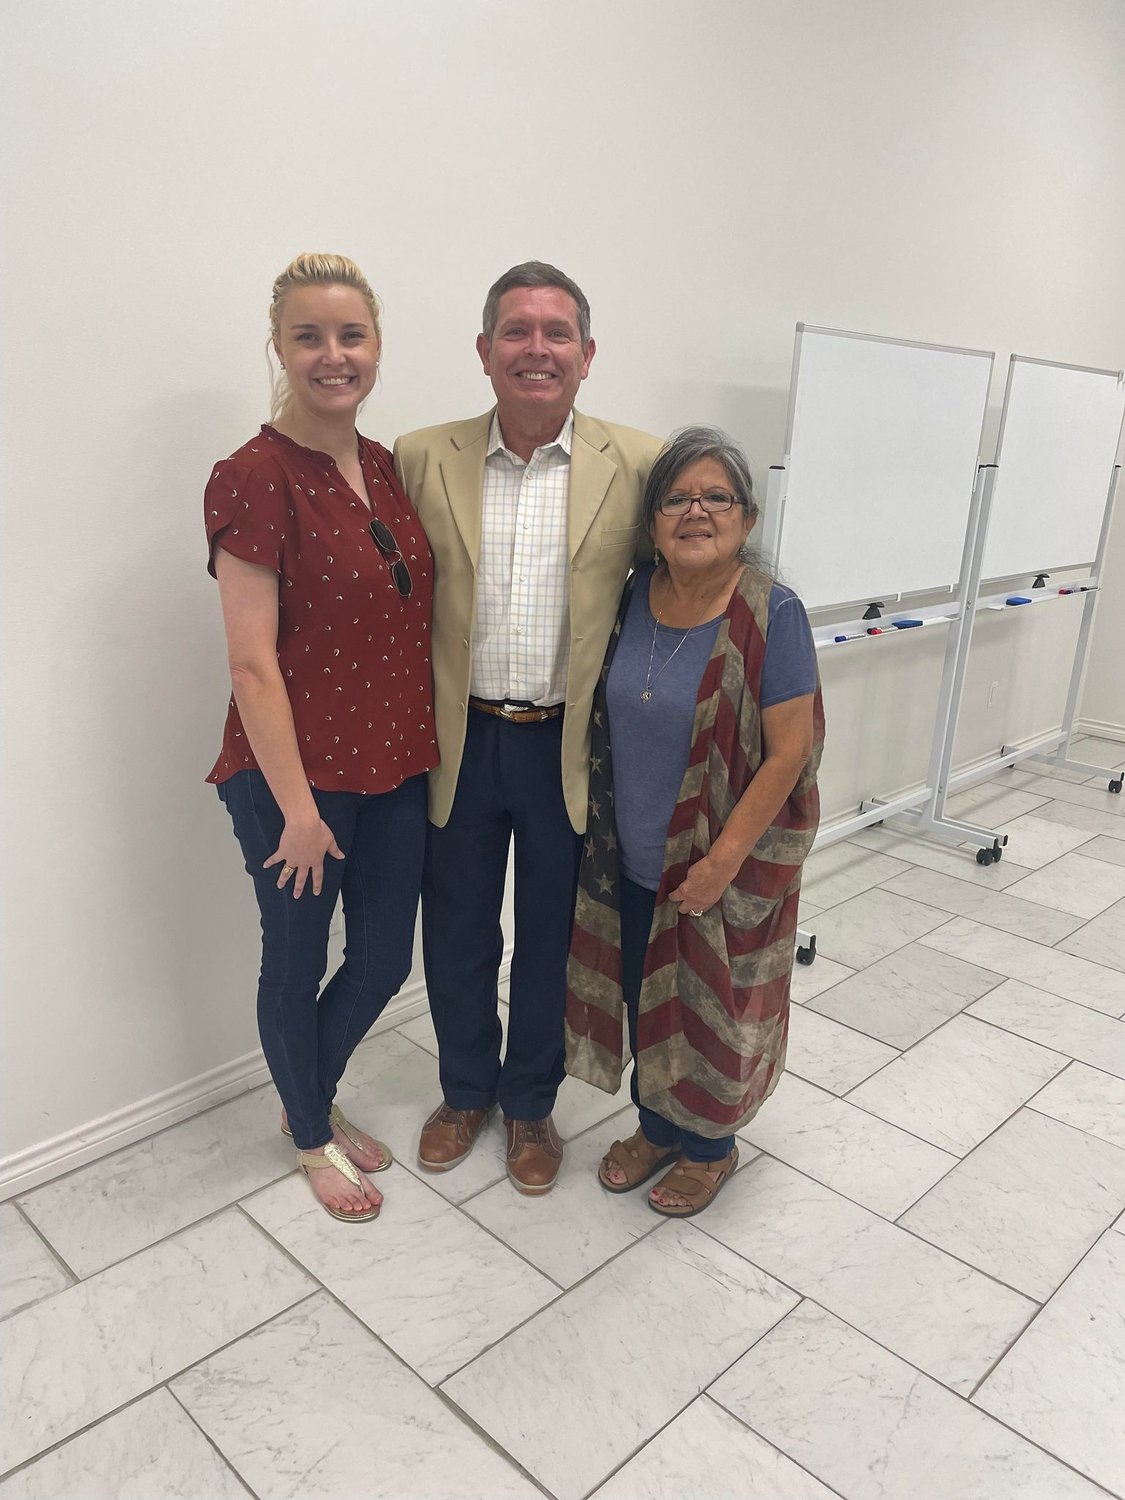 Gonzales Community Advocates sponsored a property tax relief event, “Understanding and Navigating the Protest Process,” May 17 at the Texian Heritage Conference Center in downtown Gonzales. Pictured from left are Daisy Scheske Freeman, guest speaker Michael Berlanga and Republican Party Chair Liz Hernandez.